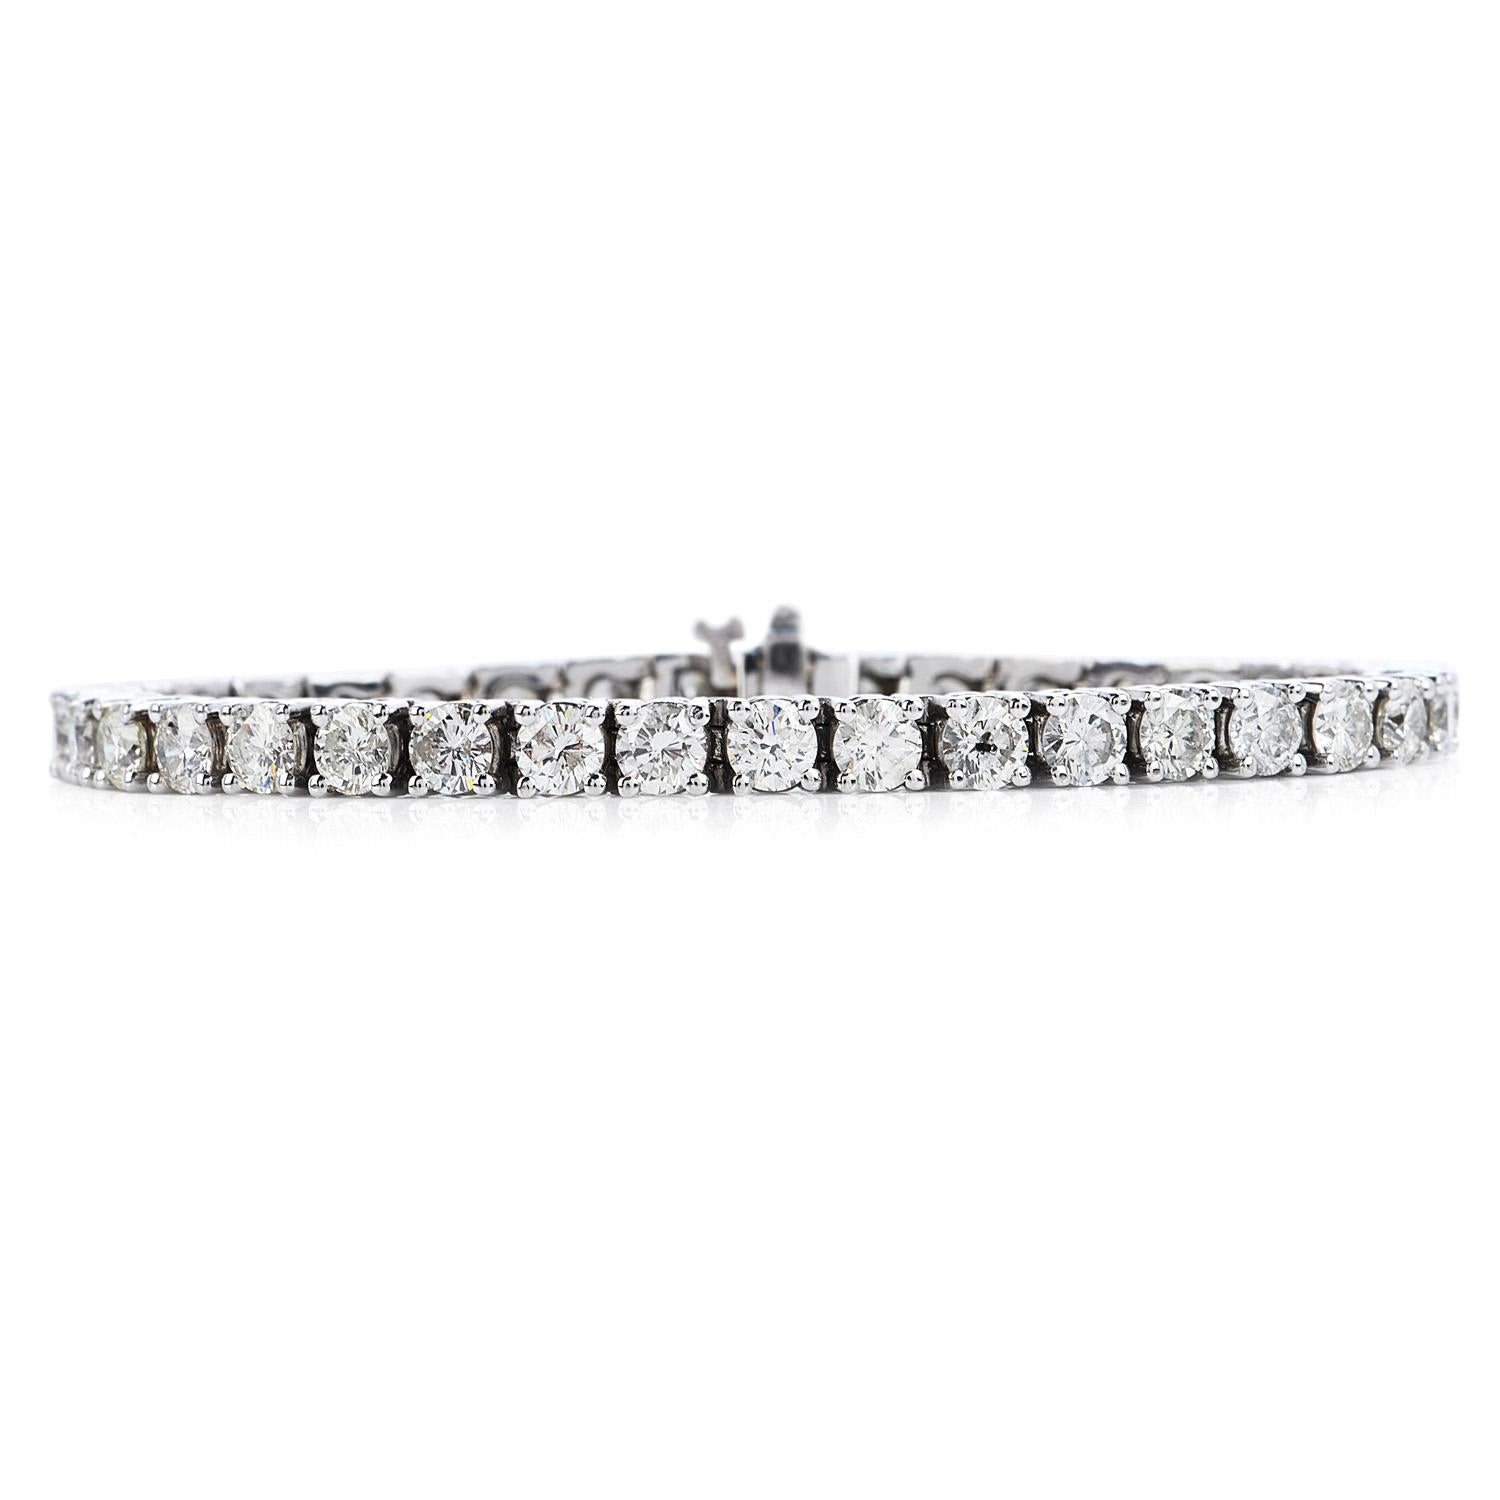 A classic and fashionable piece, the Tennis bracelet is popularly recognized as a high-performance accessory.

Crafted in solid 18K white gold, this bracelet is composed of (38) round-cut diamonds, weighing approximately 10.20-carat H-I color and